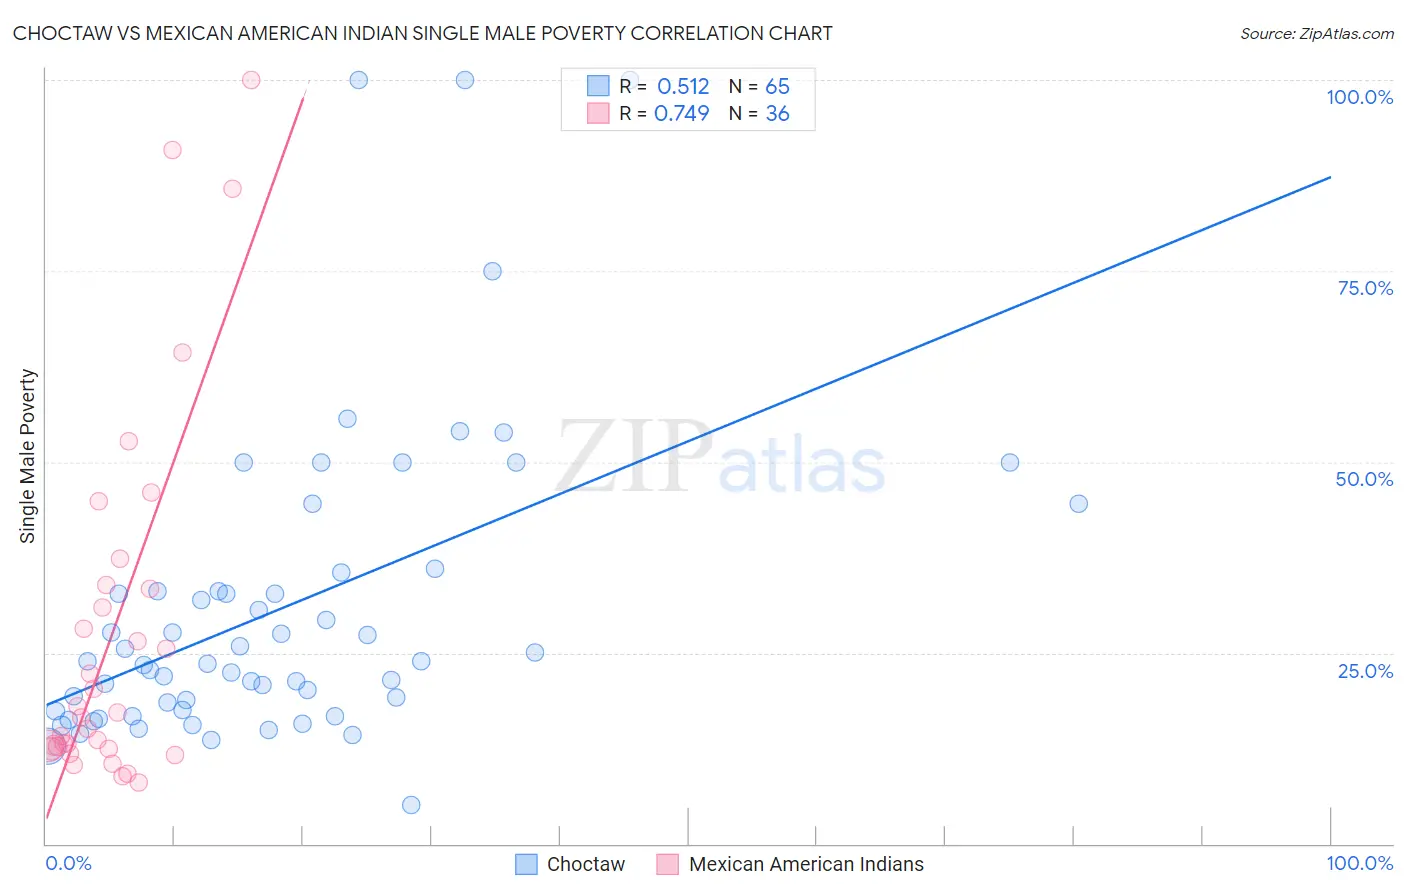 Choctaw vs Mexican American Indian Single Male Poverty